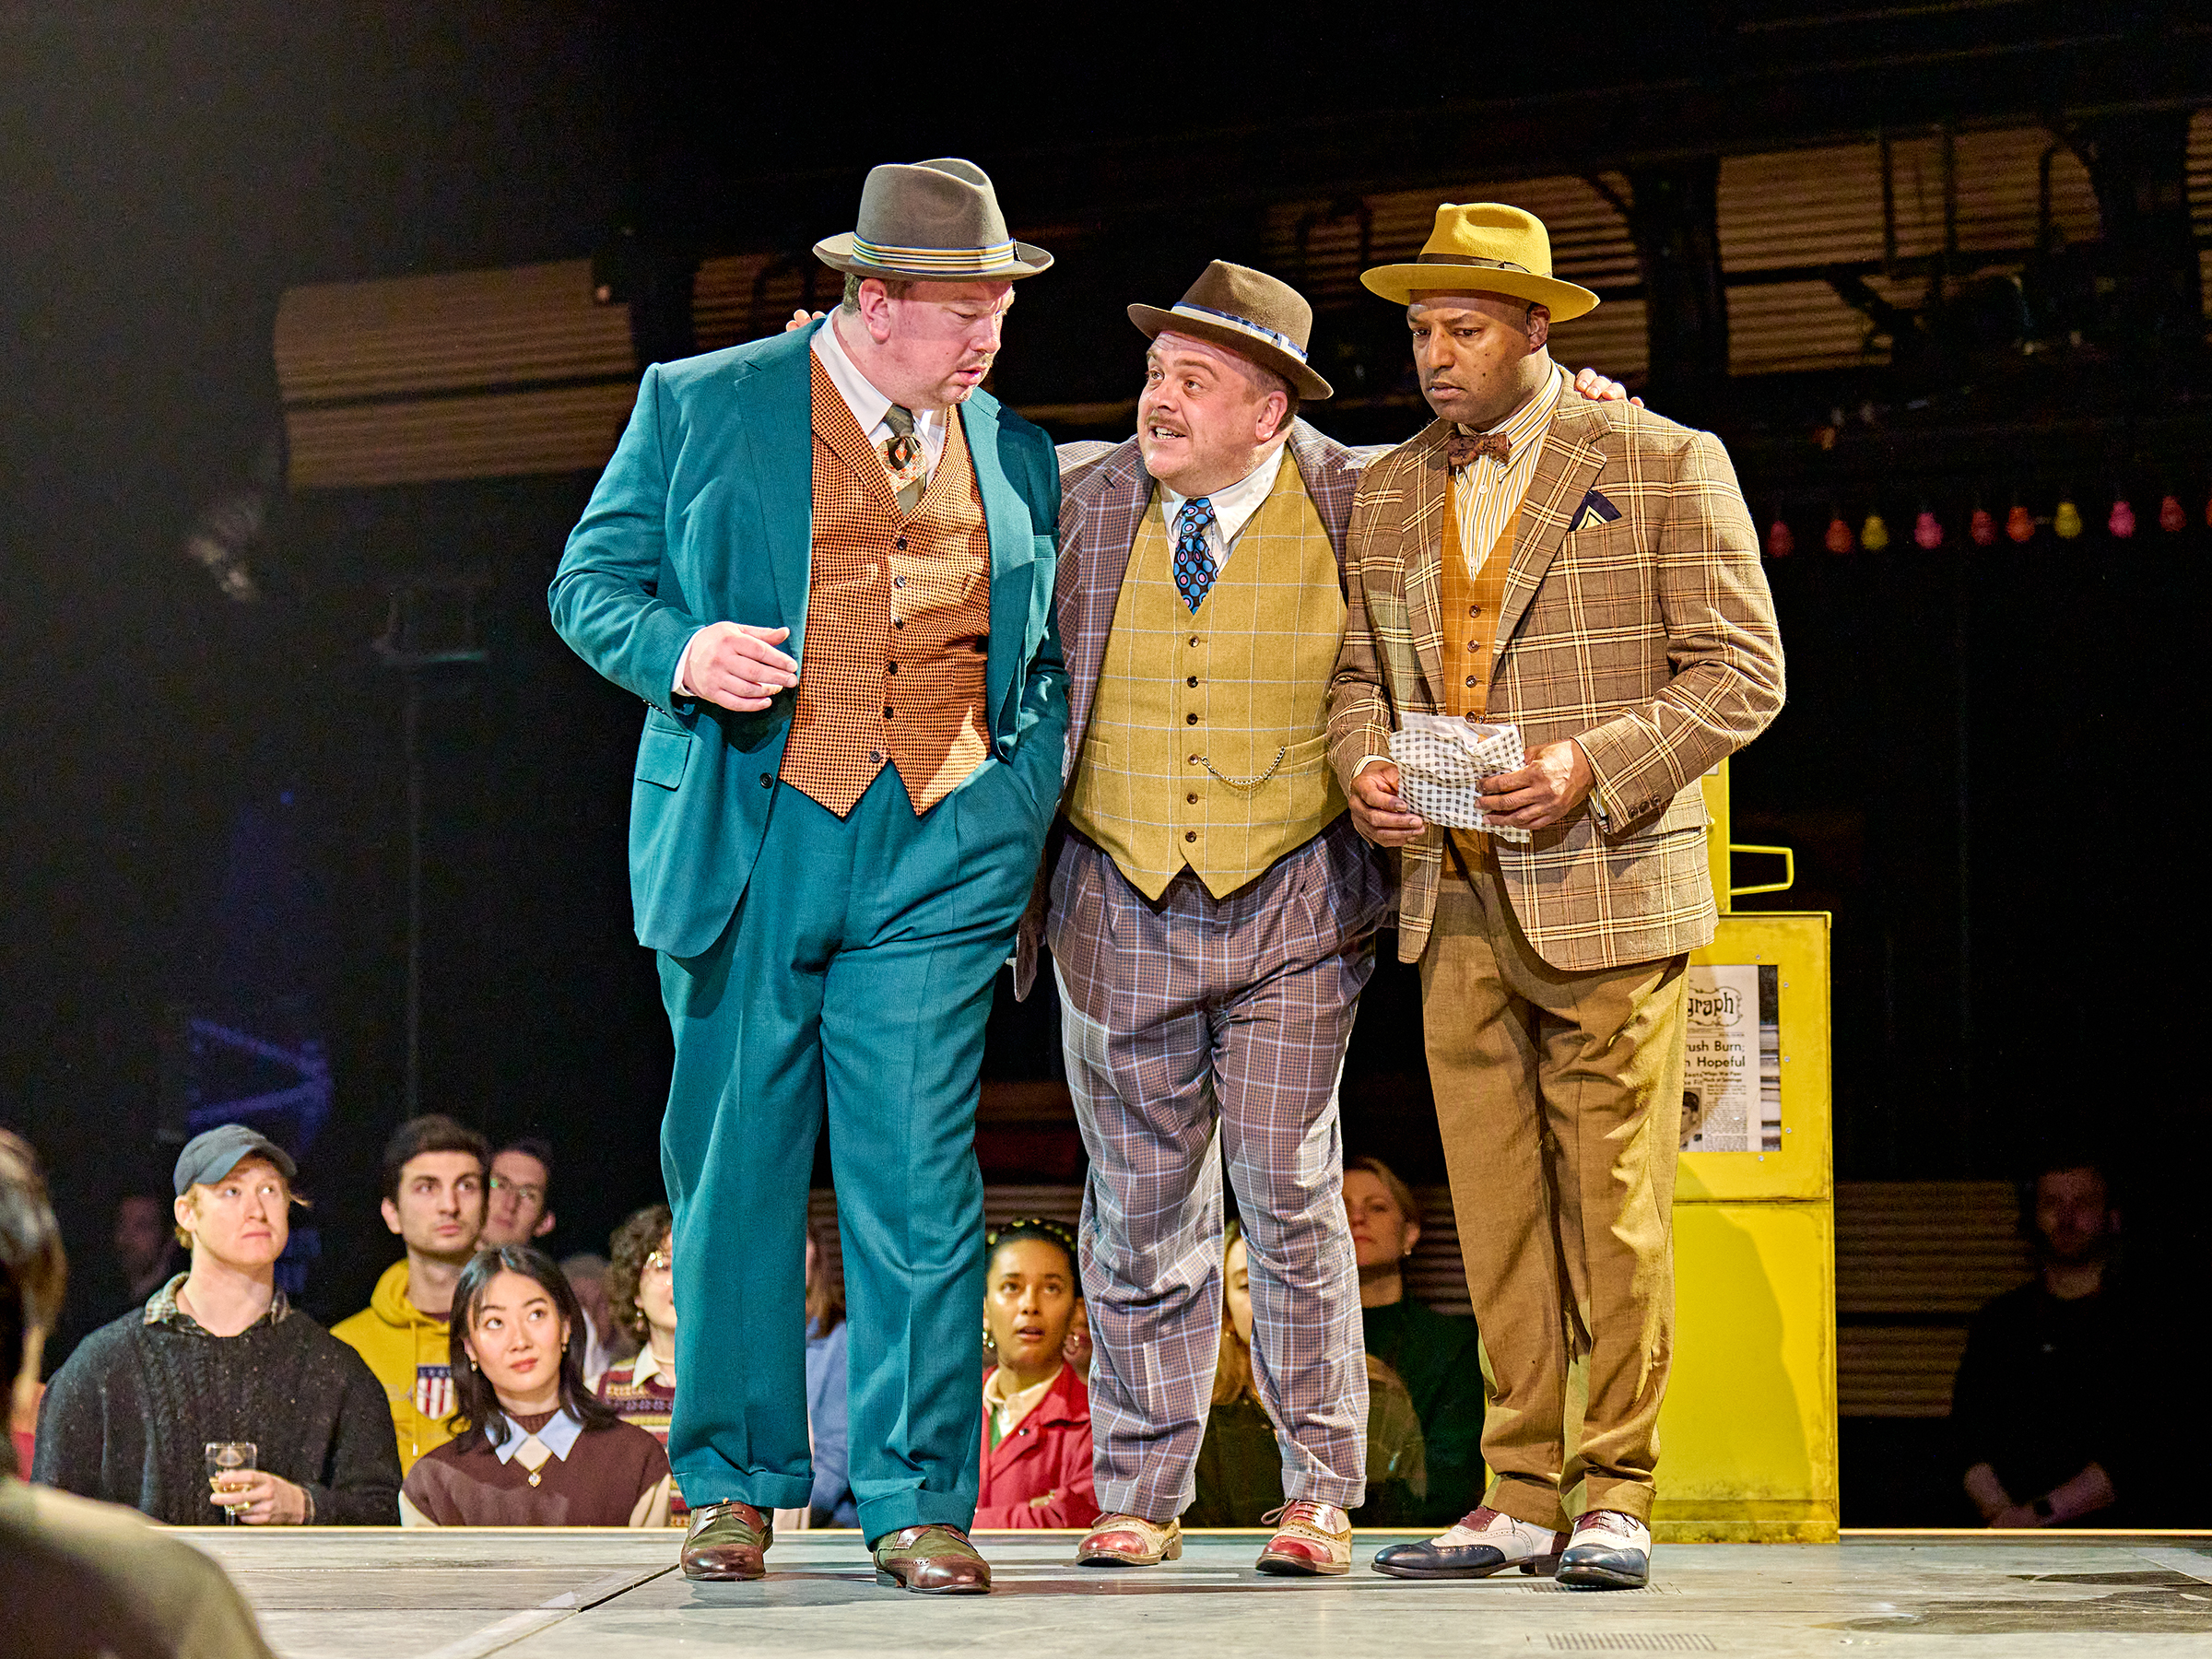 Guys & Dolls - Standing Immersive photo from the show